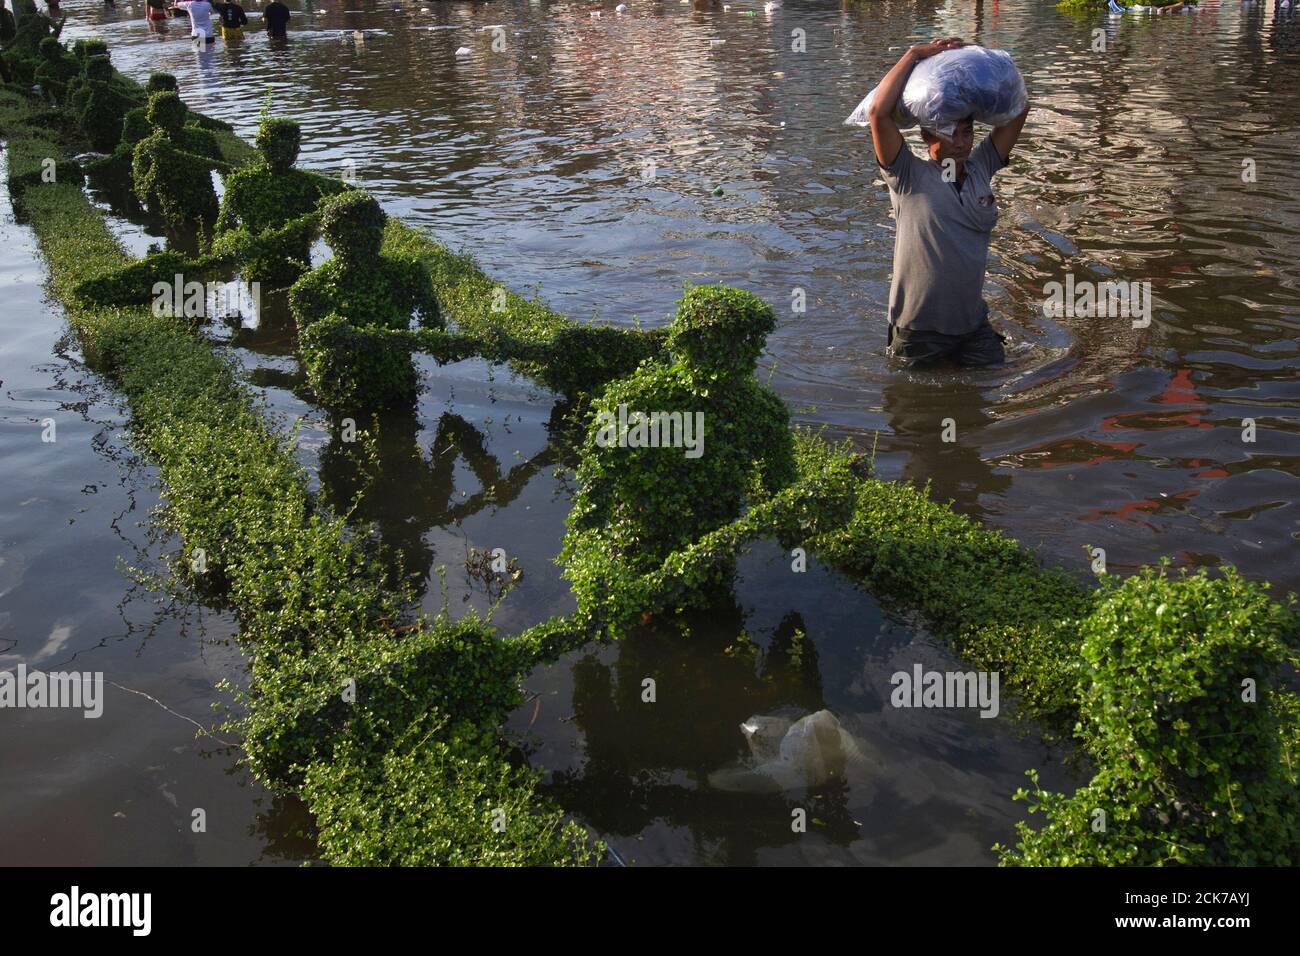 A man wades past sculptured hedges submerged by flood waters in a median in Bangkok's Bang Phlat district on October 30, 2011. Peak tides tested Bangkok's flood defenses on Sunday as hope rose that the centre of the Thai capital might escape the worst floods in decades, but that was little comfort for swamped suburbs and provinces where worry about disease is growing.   REUTERS/Adrees Latif    (THAILAND - Tags: ENVIRONMENT DISASTER TPX IMAGES OF THE DAY) Stock Photo